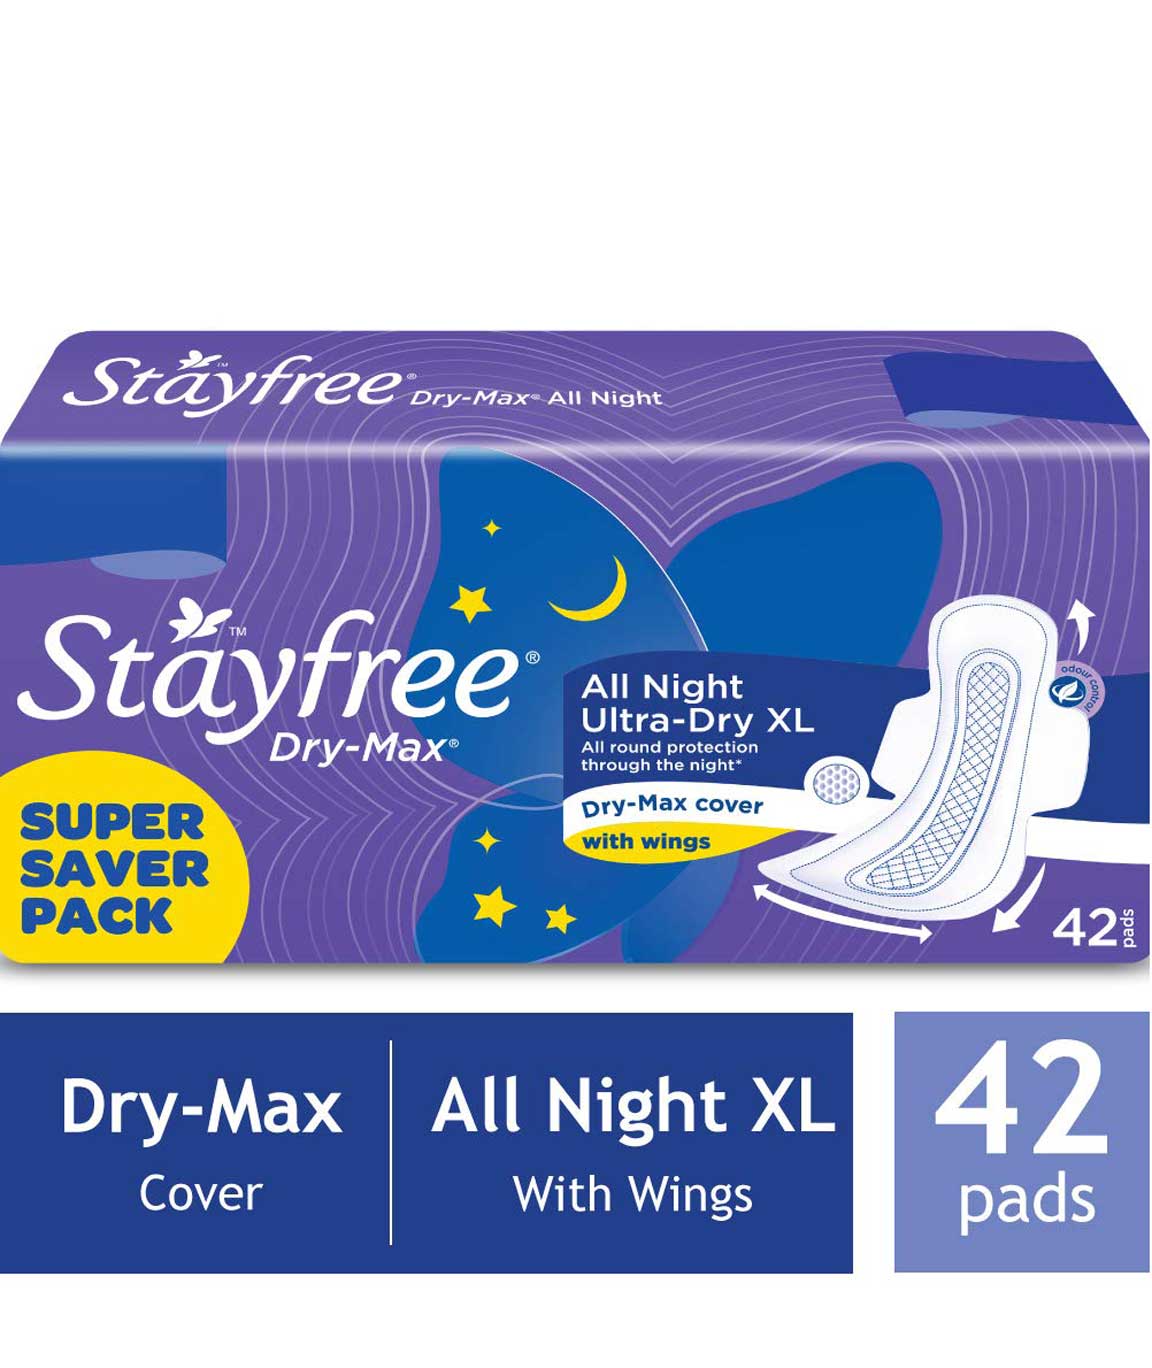 Stayfree All Night XL Dry Max Cover Sanitary Napkins - 42 Pads (Super Saver Pack)